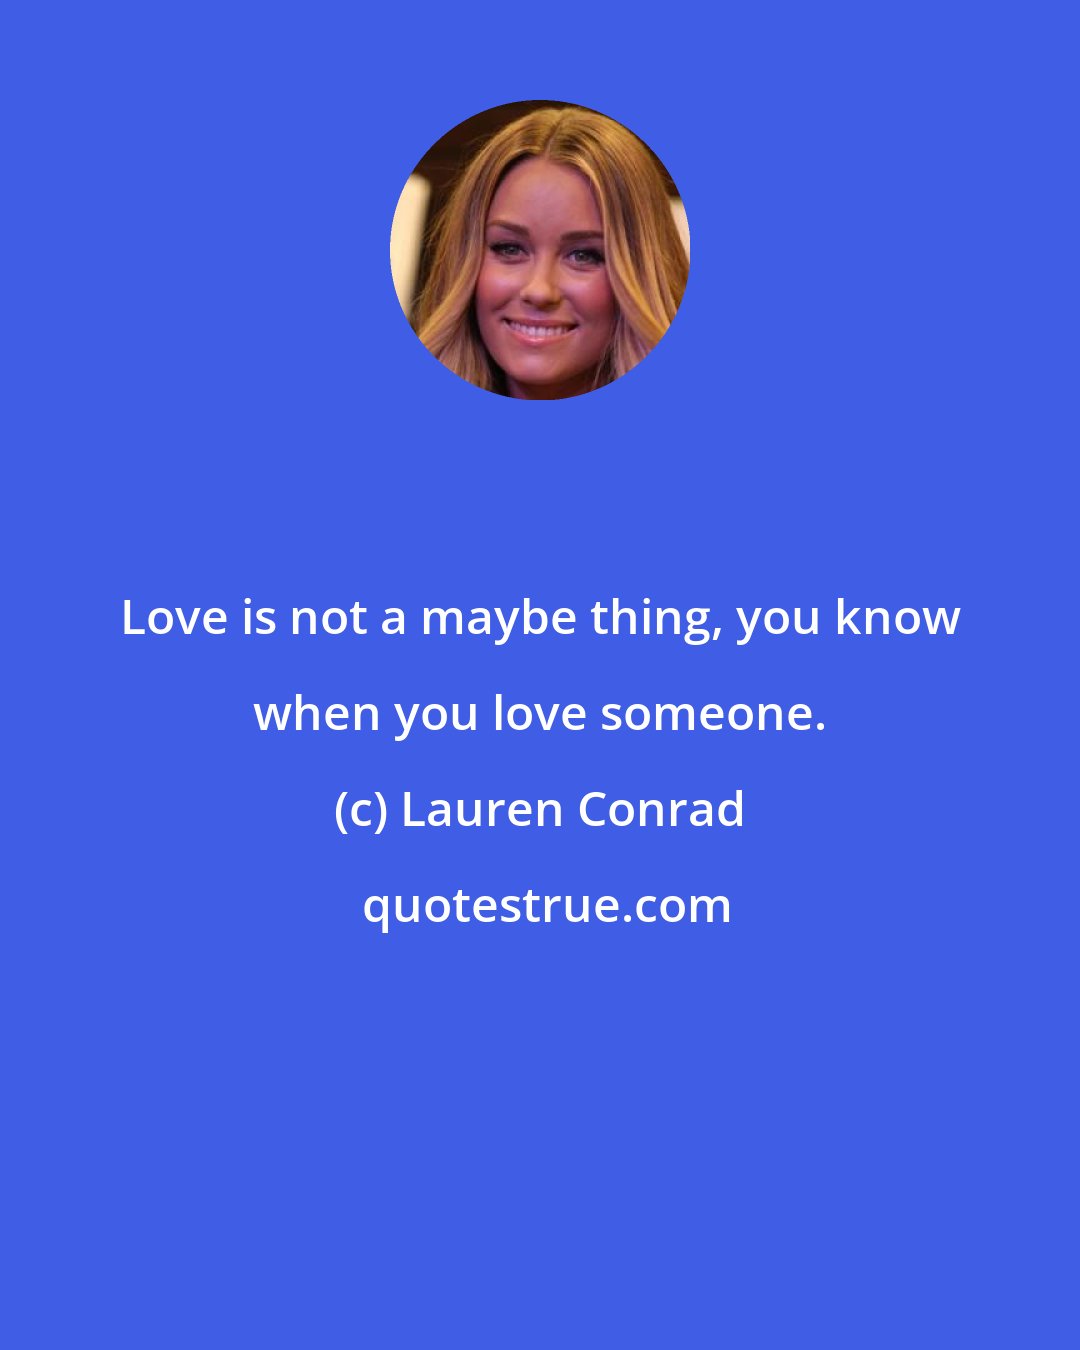 Lauren Conrad: Love is not a maybe thing, you know when you love someone.